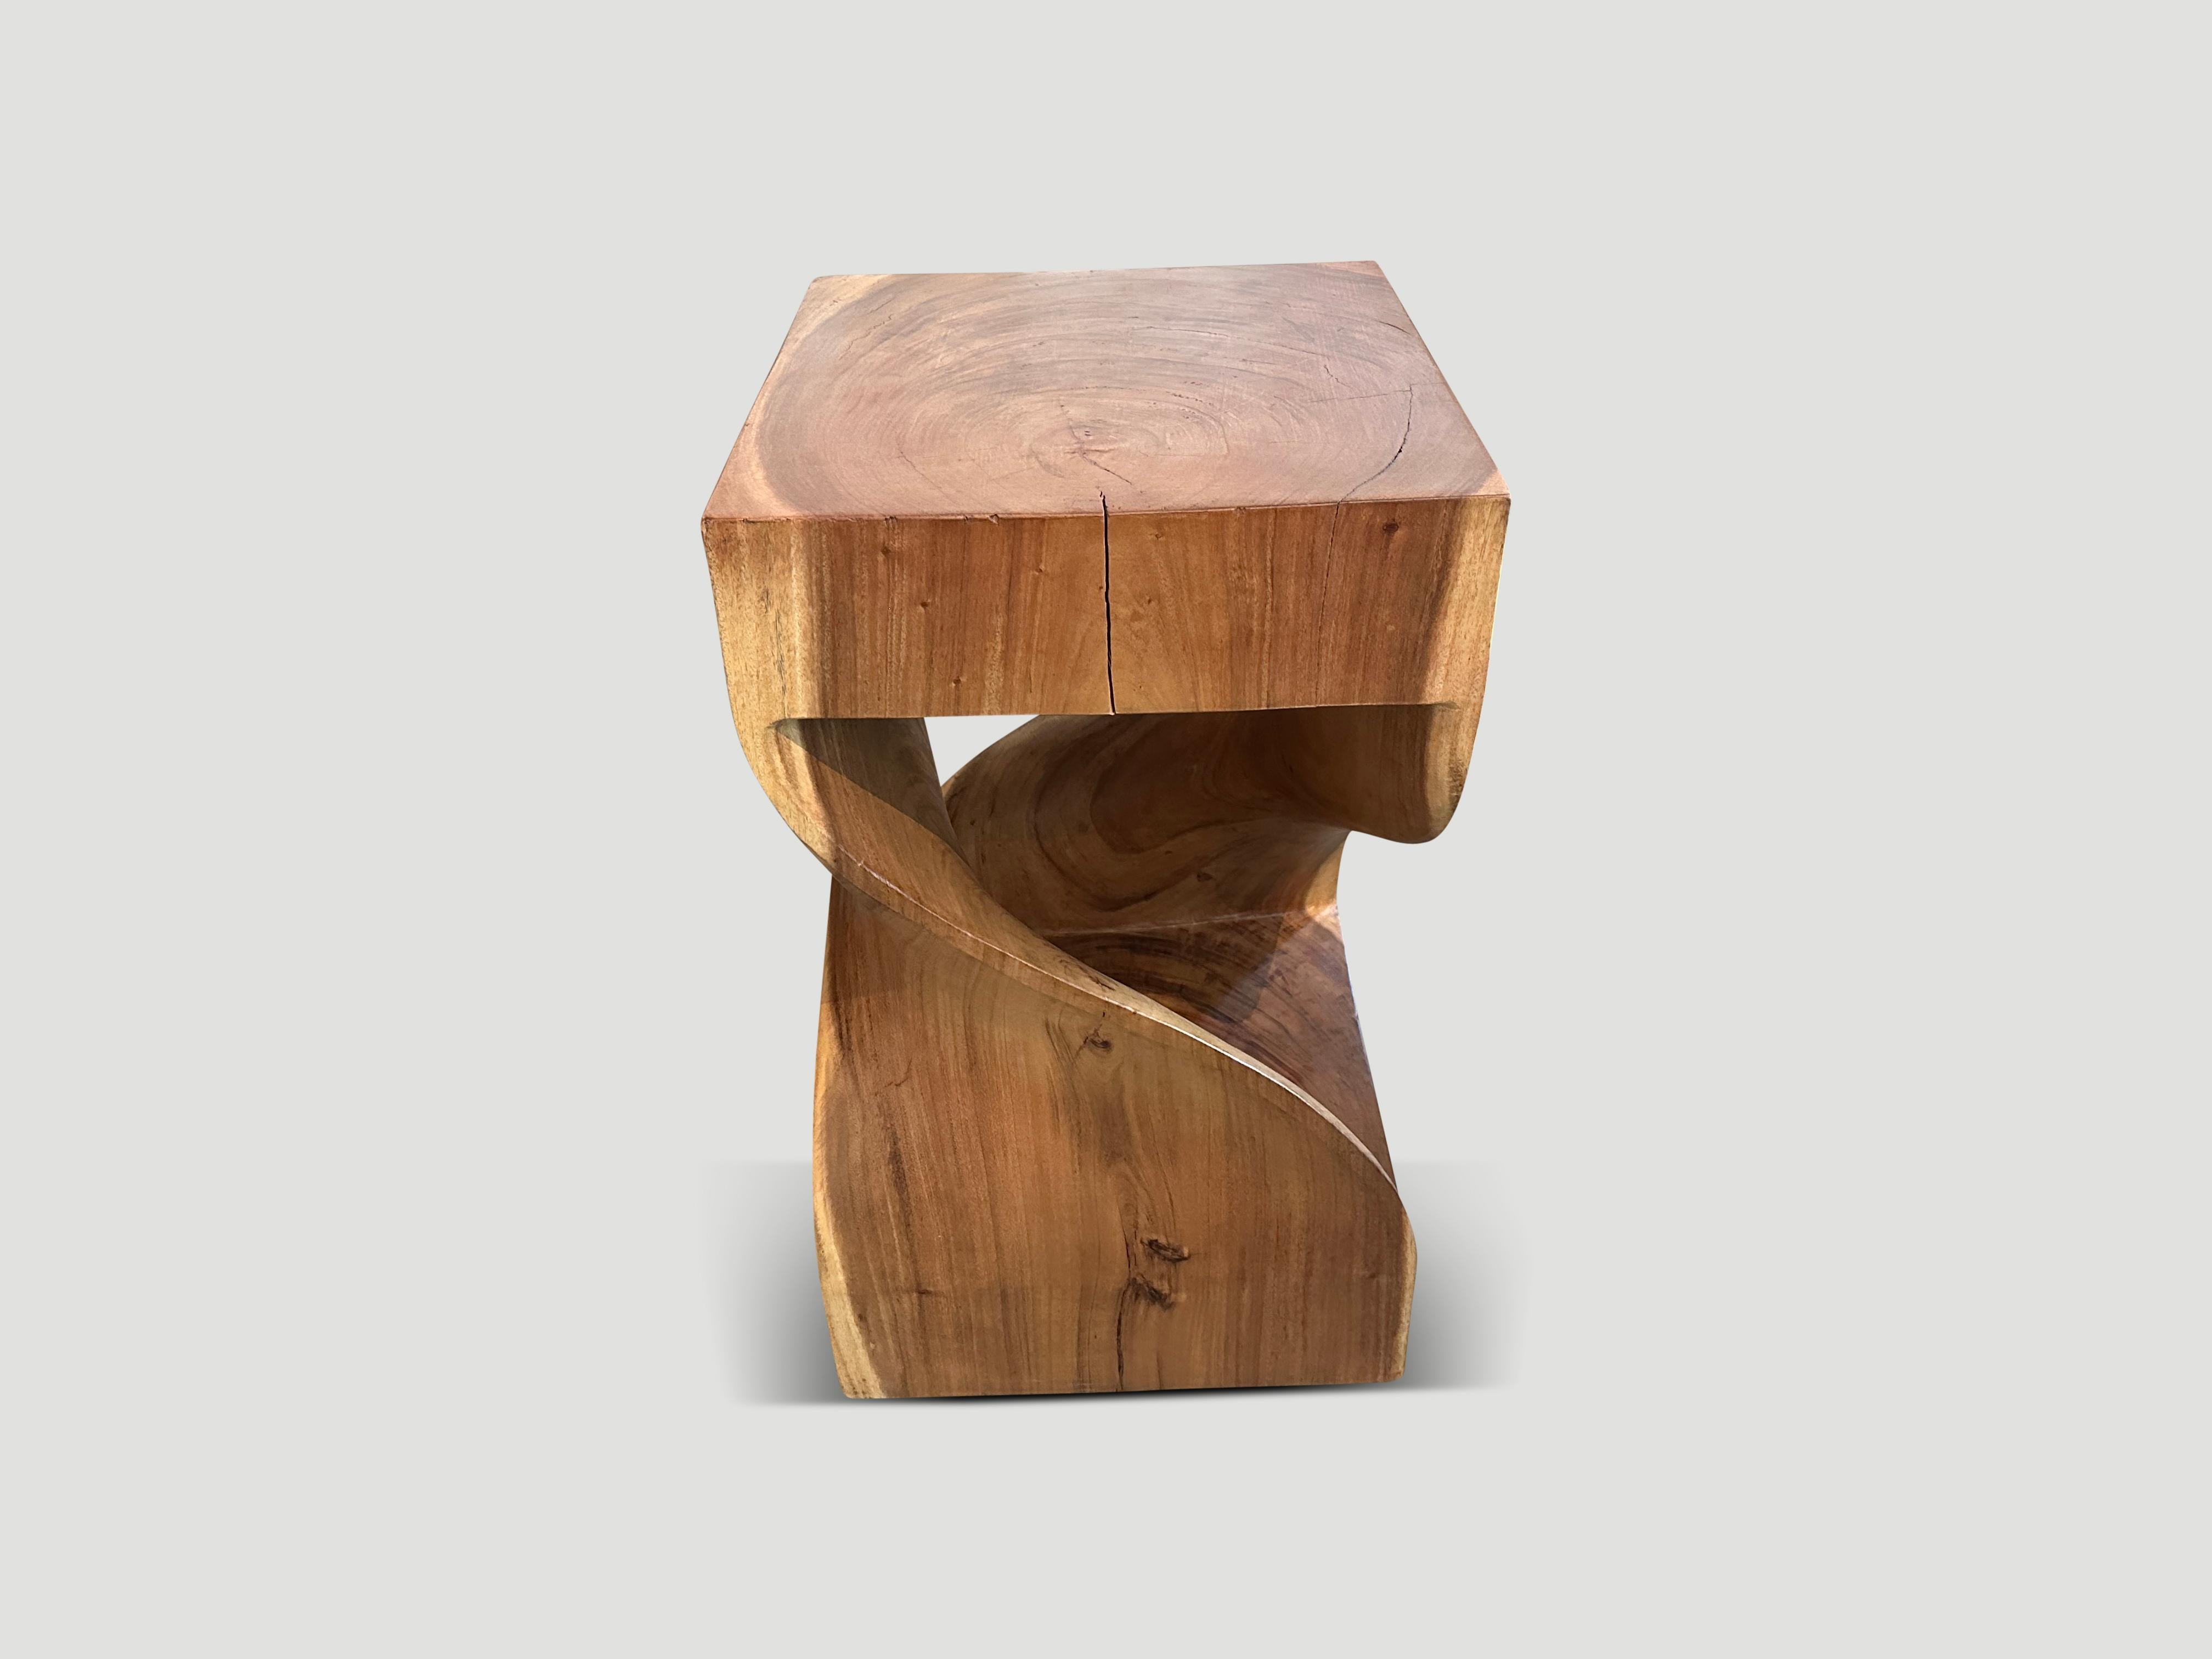 Contemporary Andrianna Shamaris Sculptural Suar Wood Side Table or Pedestal For Sale